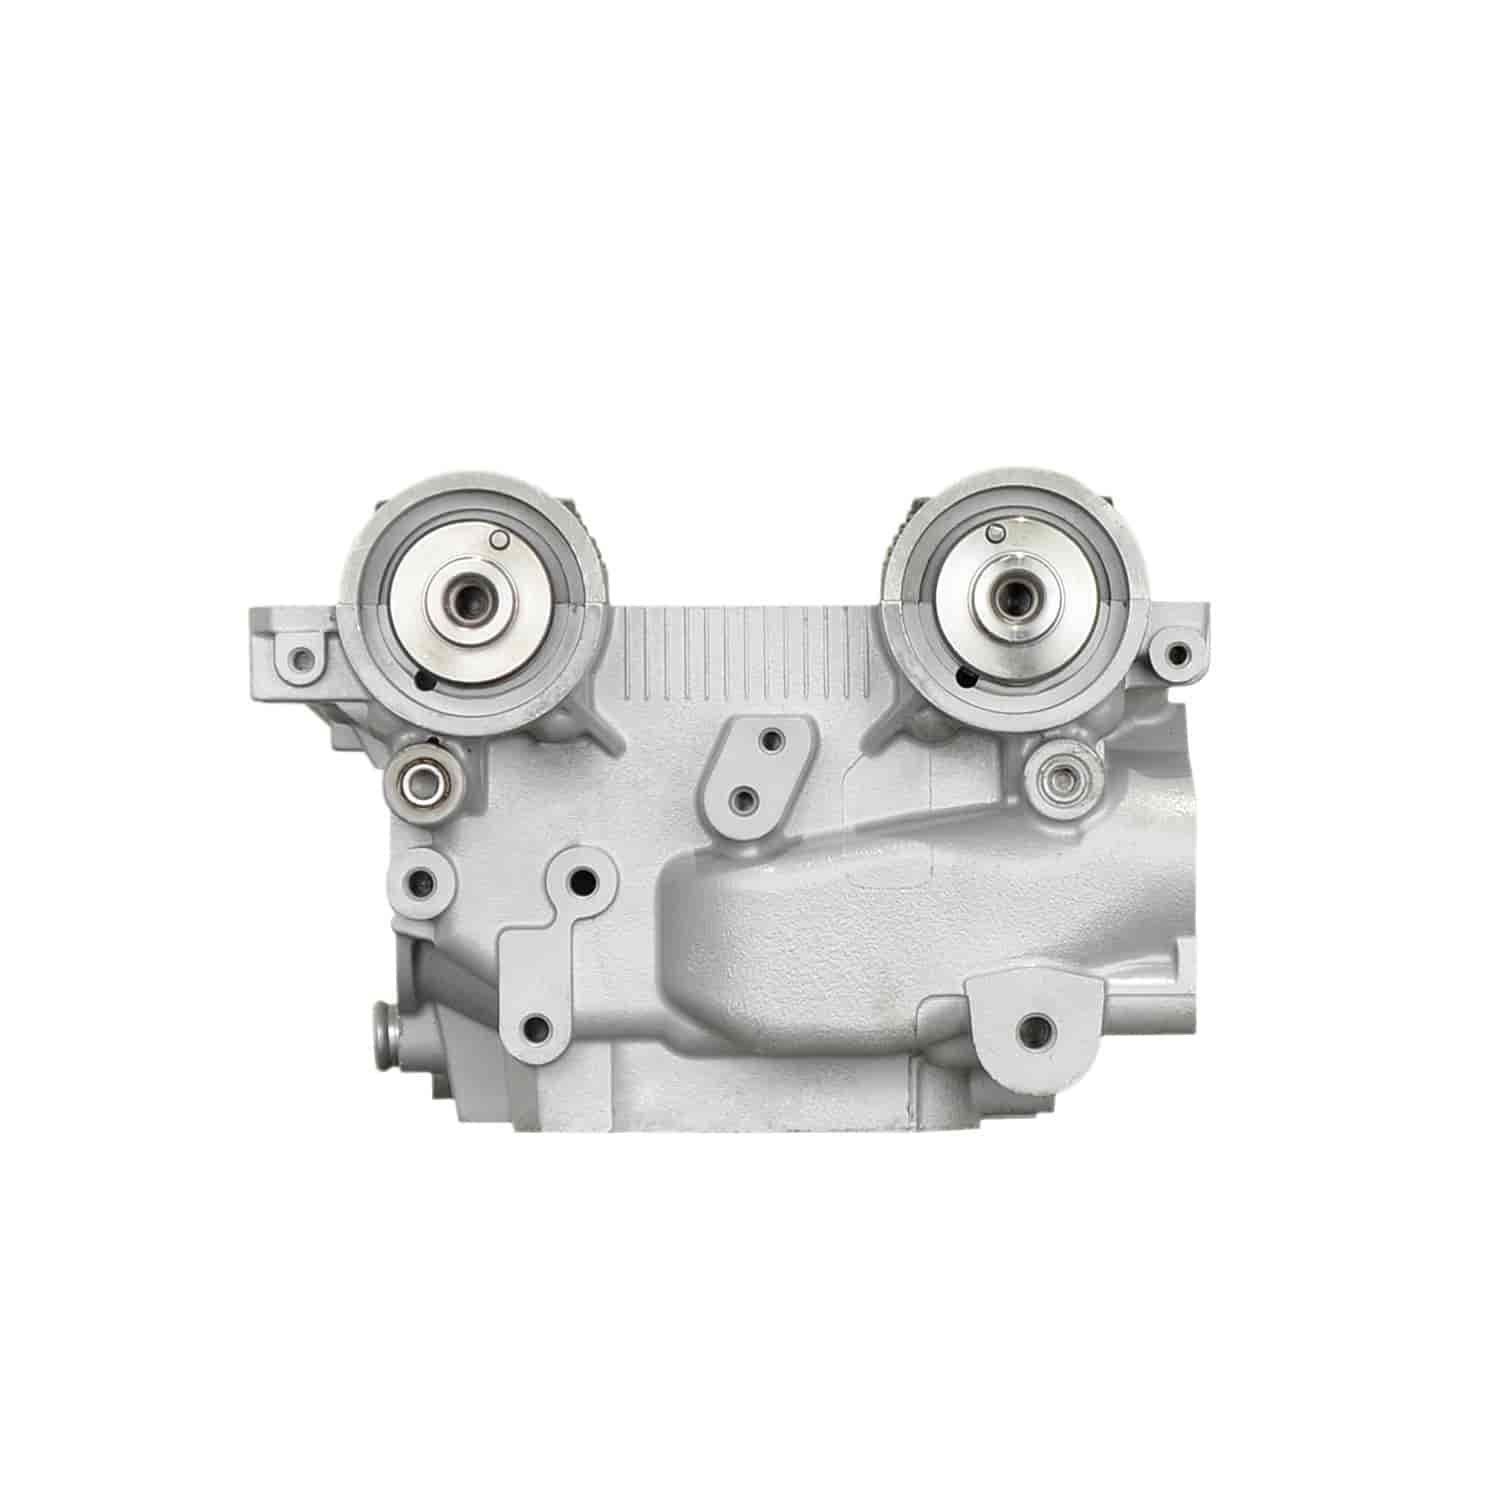 Remanufactured Cylinder Head for 2011-2013 Chevy with 1.8L L4